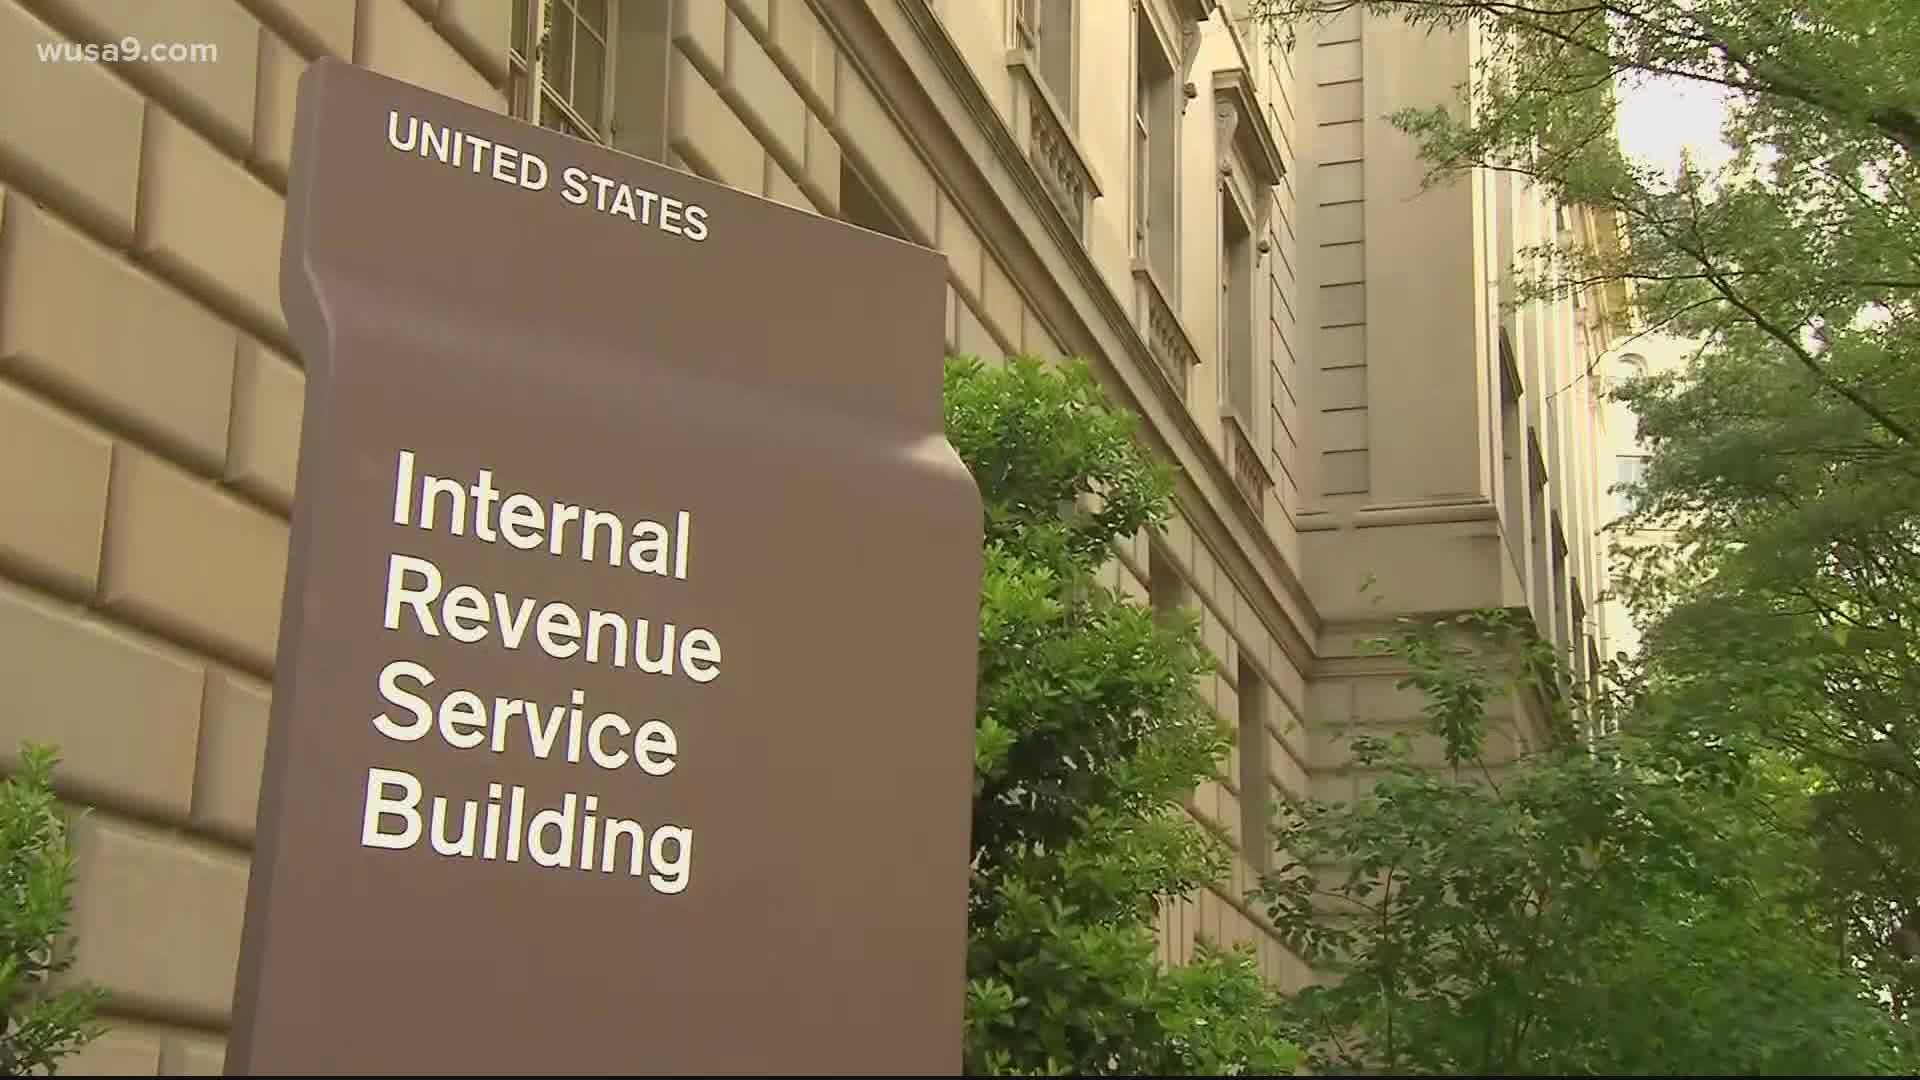 Ariane tracked down someone at the IRS and they said the representative is an alternative to what's in the phone message and posted online.